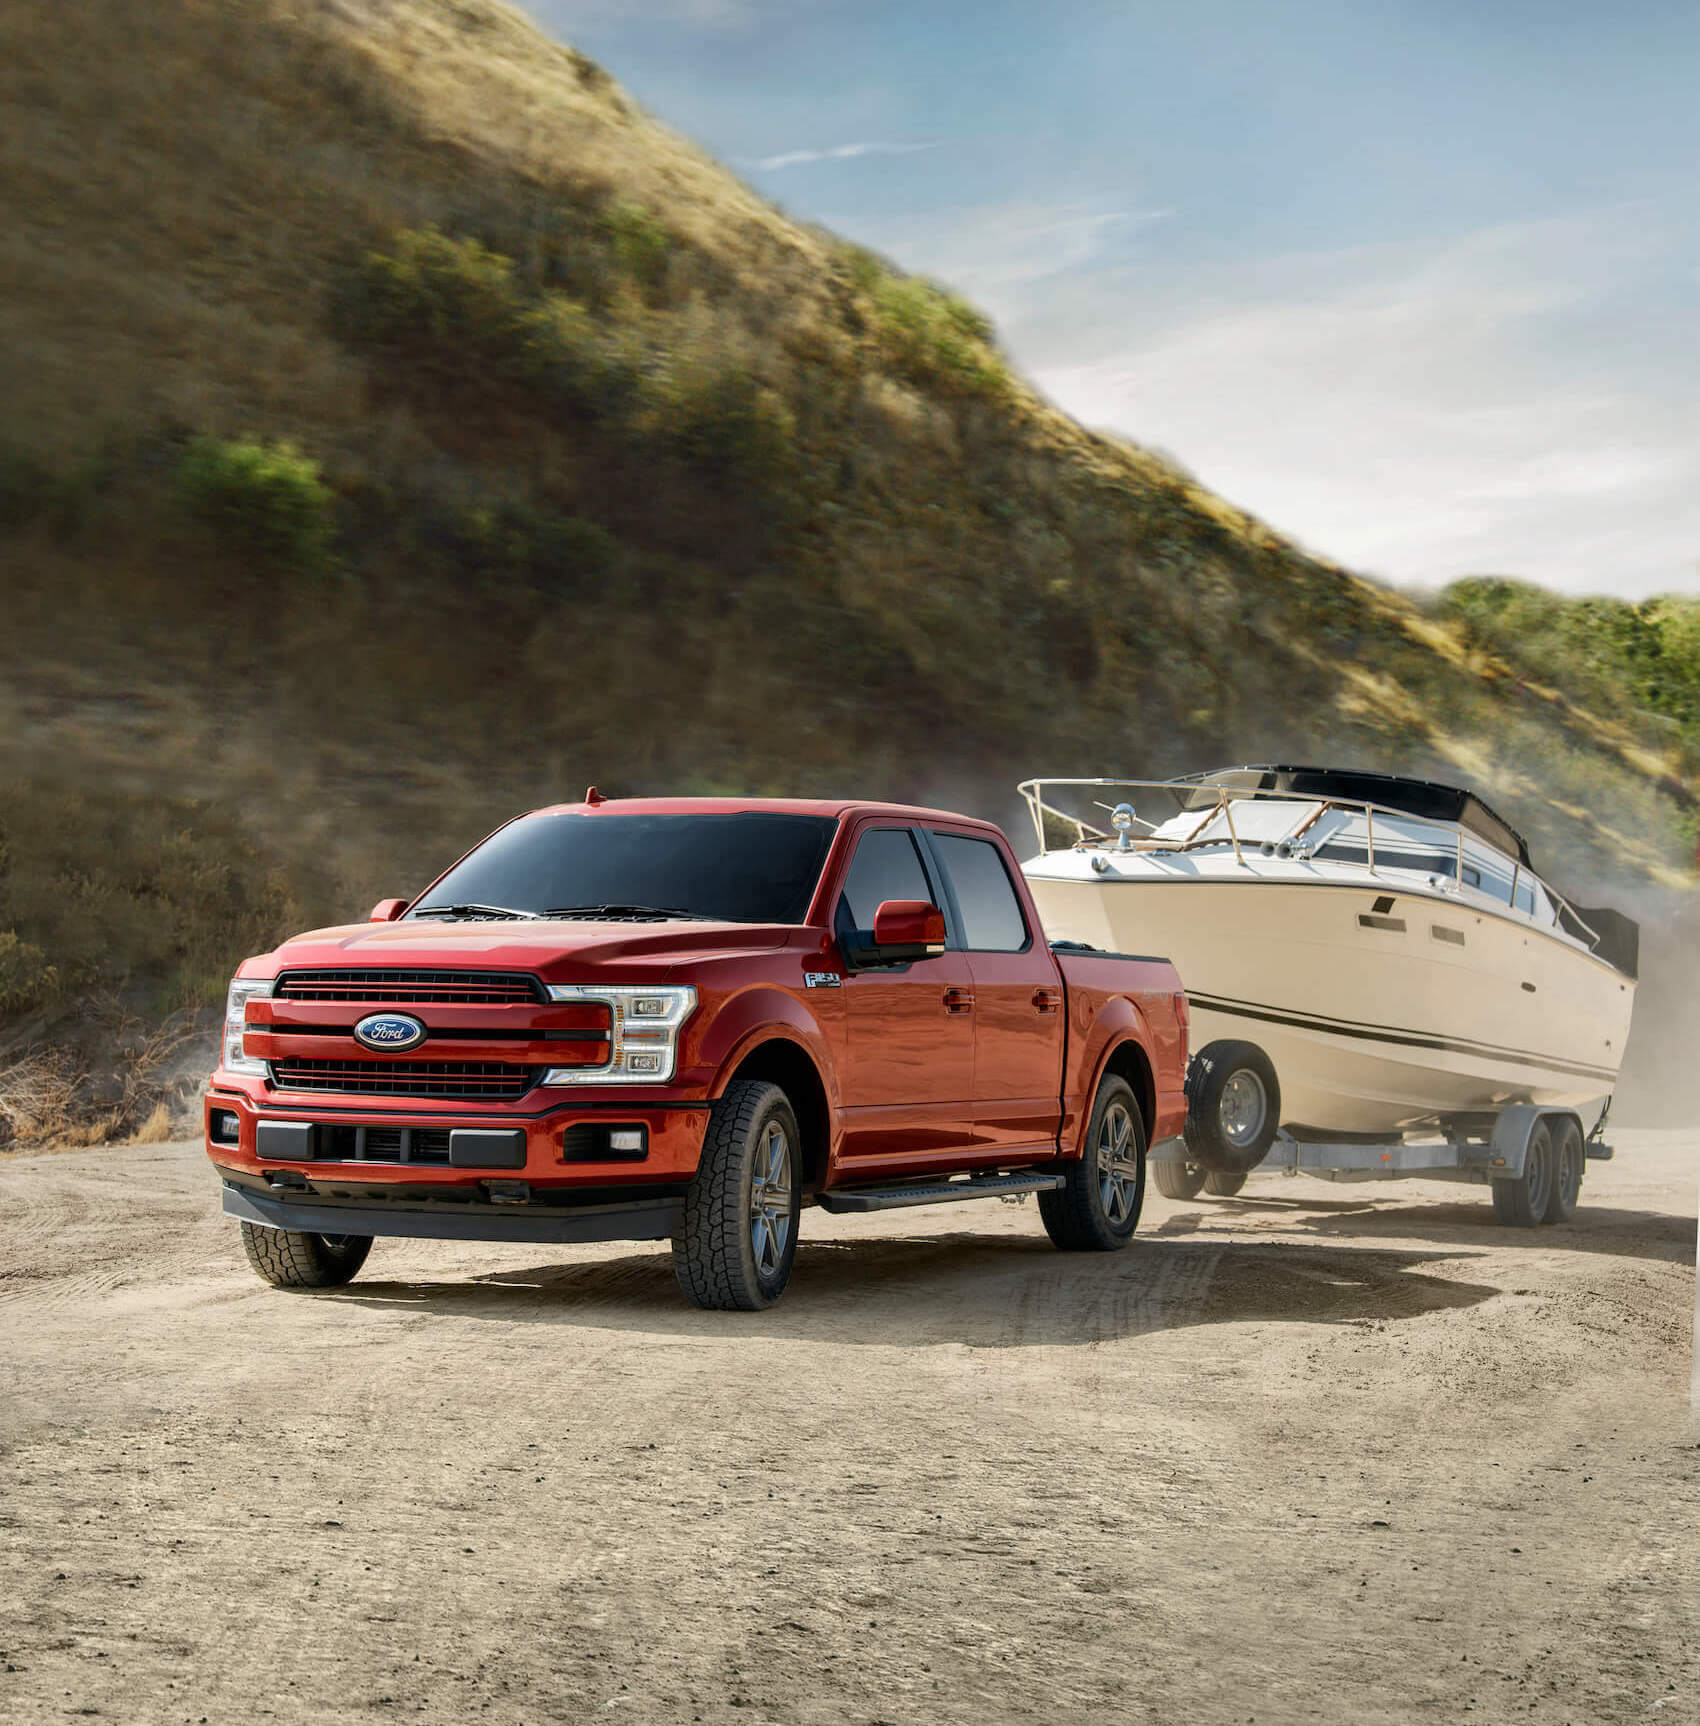 2020 Ford F-150 Webster NY | Henderson Ford 2020 Ford F150 2.7 L Towing Capacity